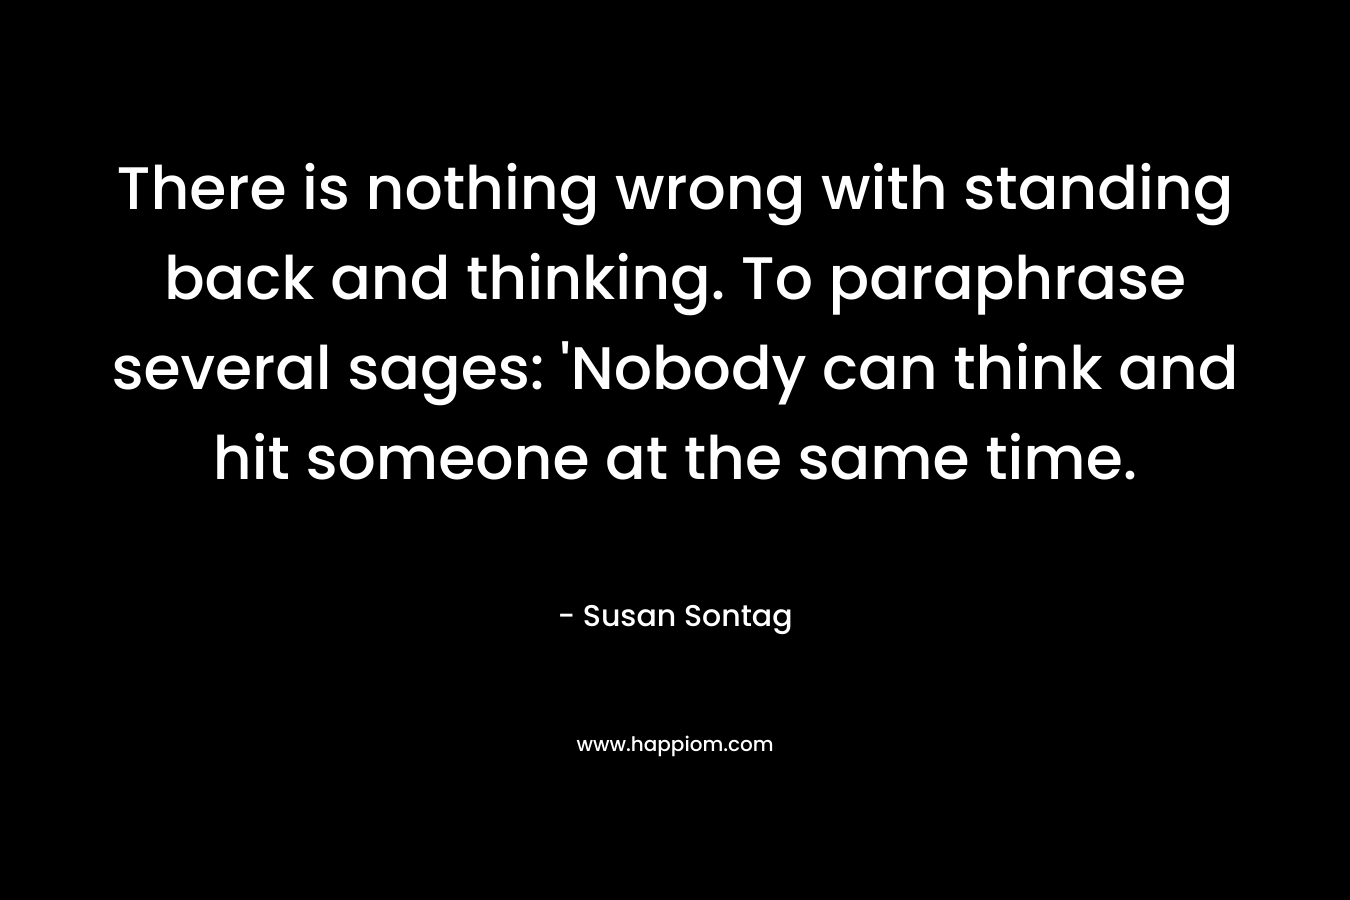 There is nothing wrong with standing back and thinking. To paraphrase several sages: ‘Nobody can think and hit someone at the same time. – Susan Sontag